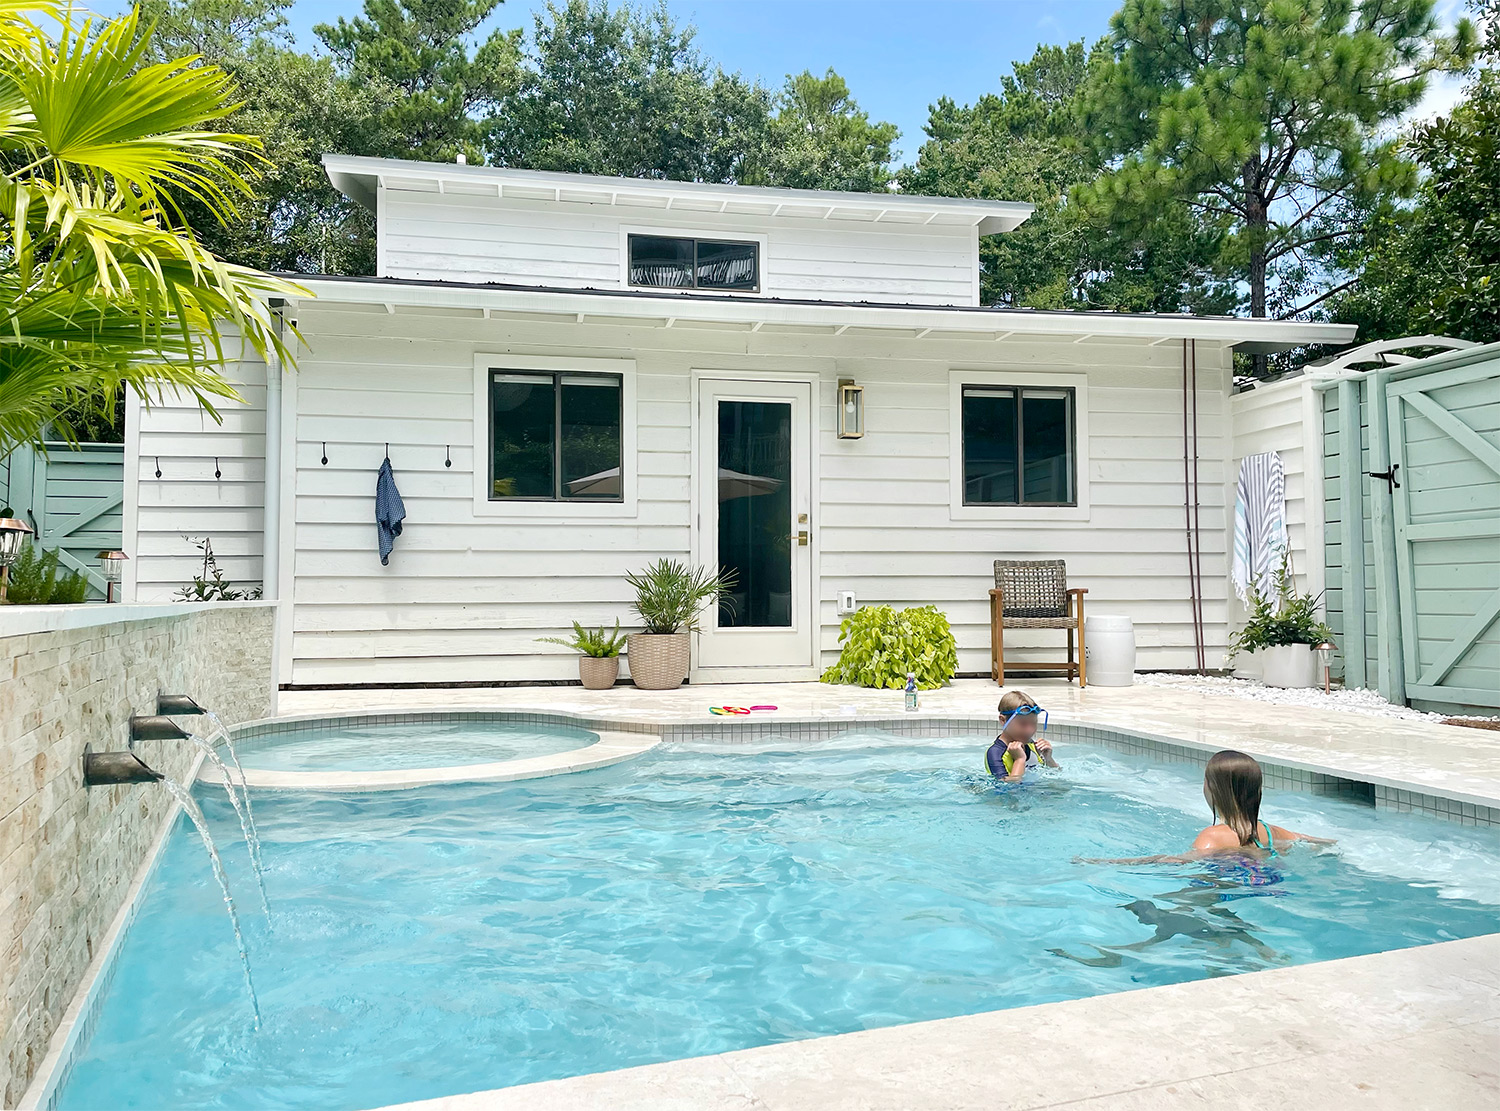 Our Small Backyard Pool: The Cost, Process & More